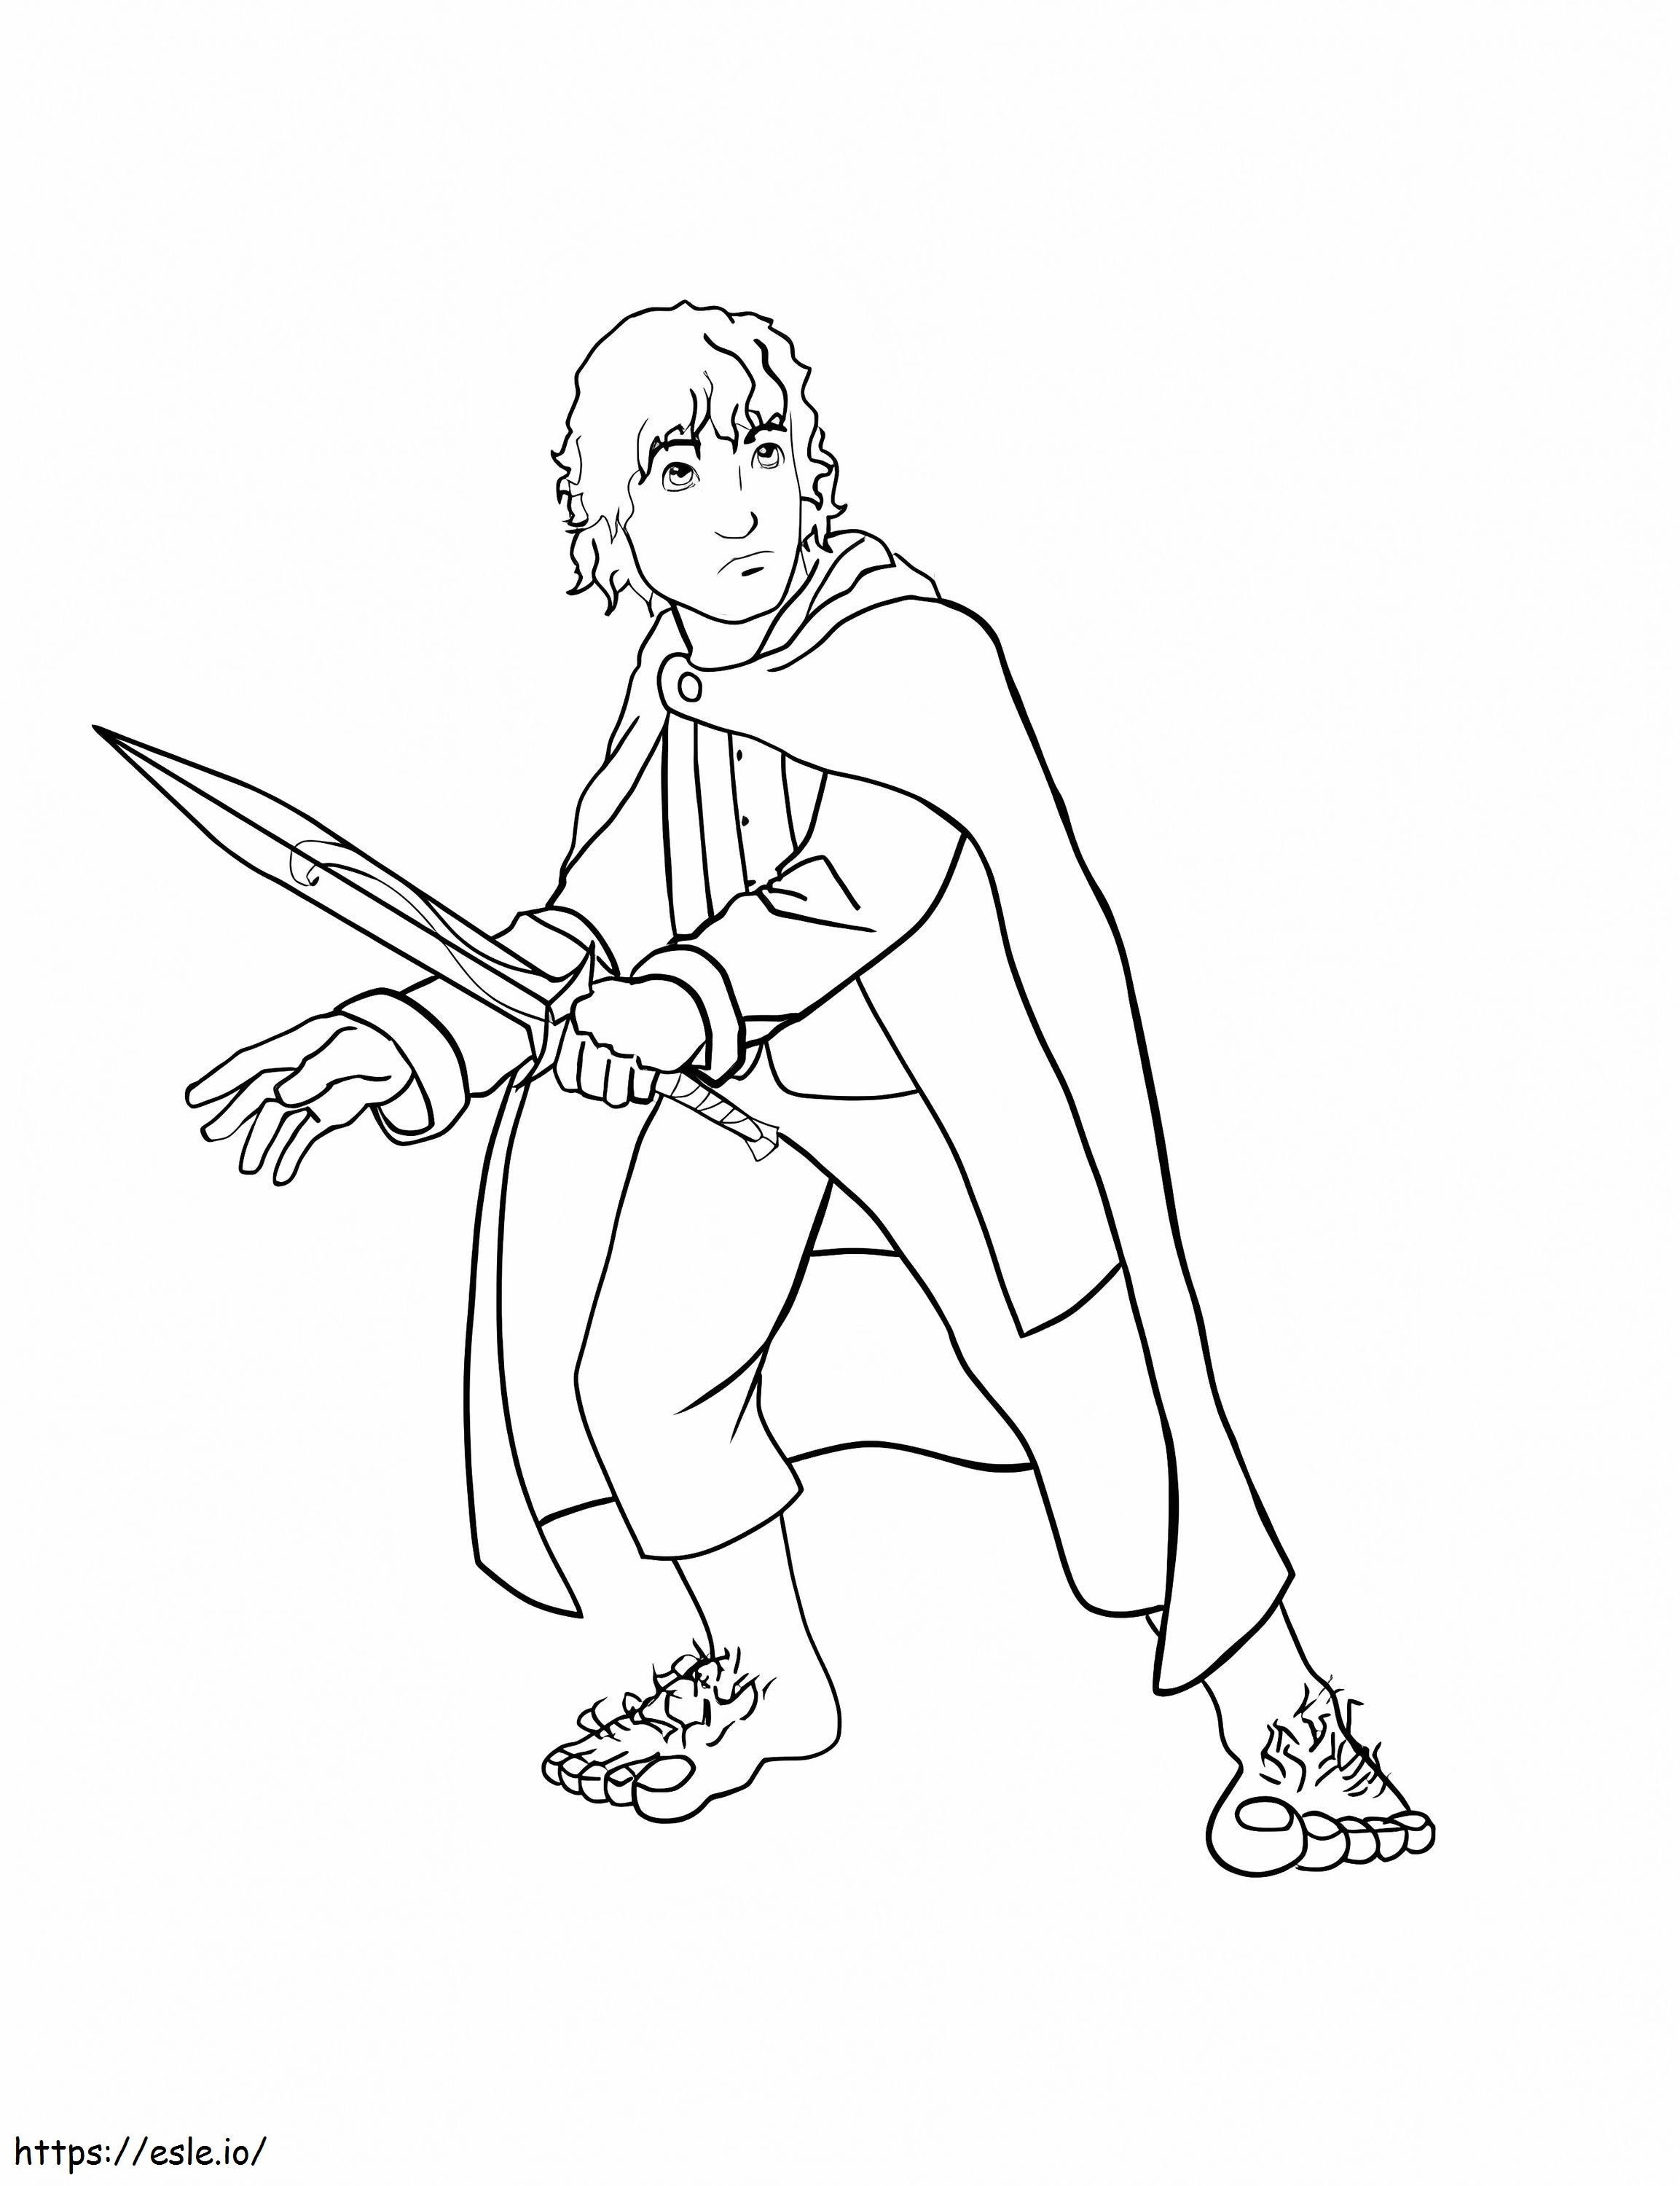 Frodo coloring page